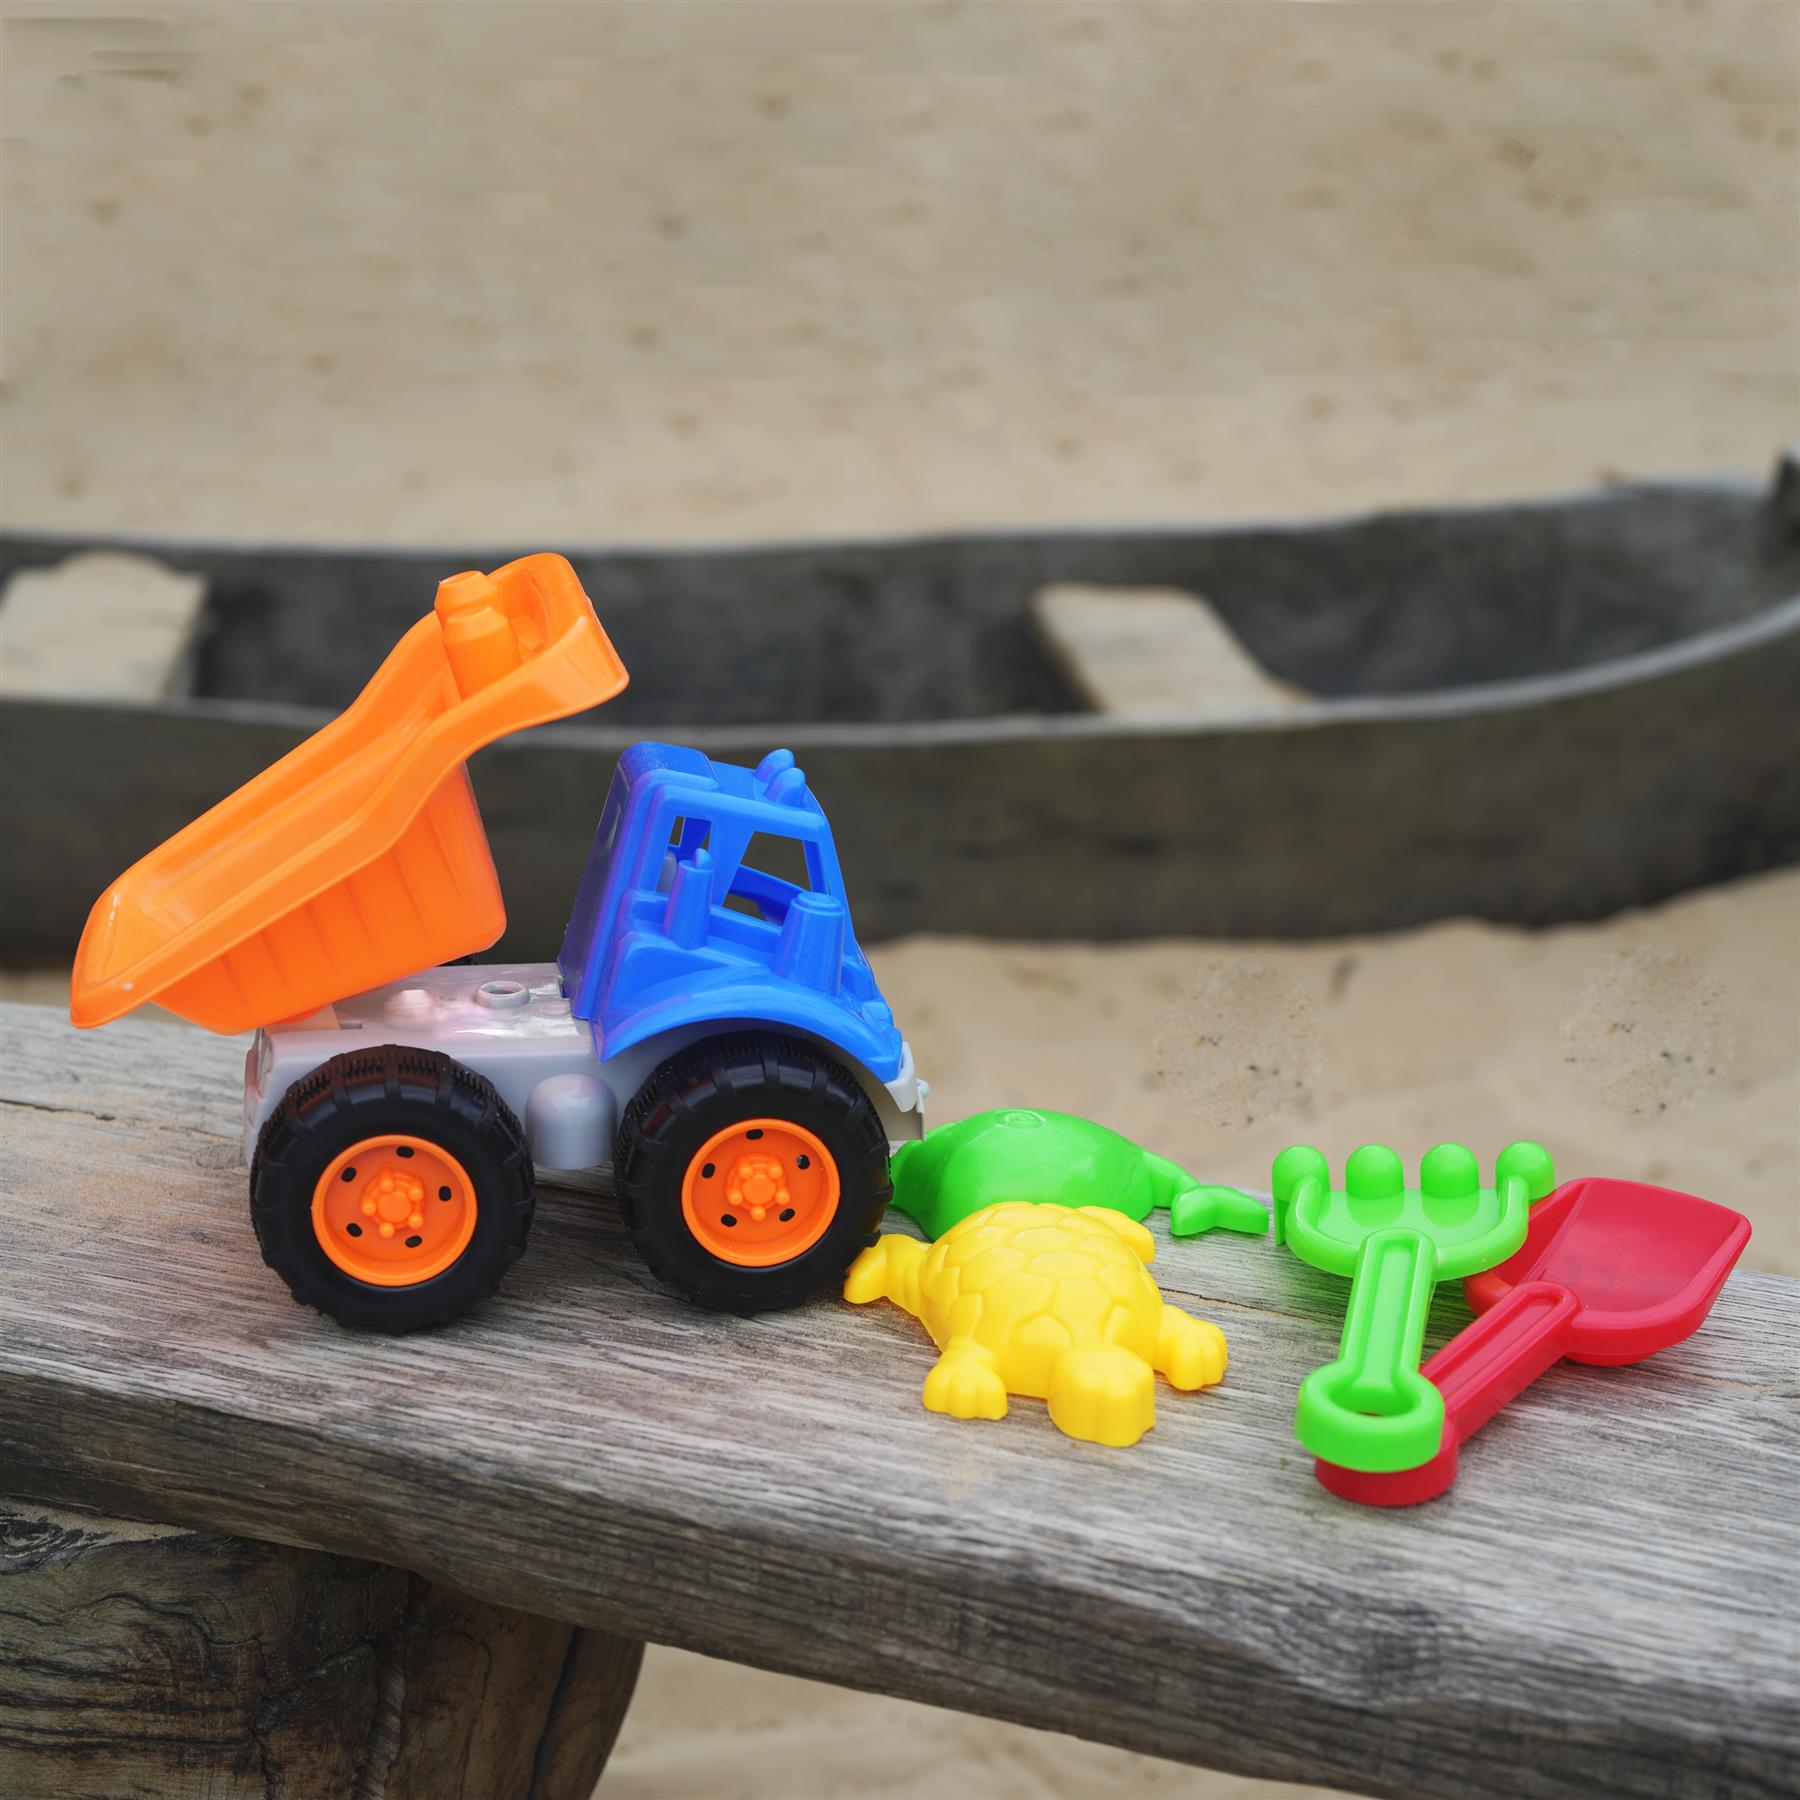 Sand Truck & Accessories Set (5 Pcs.) by The Magic Toy Shop - UKBuyZone